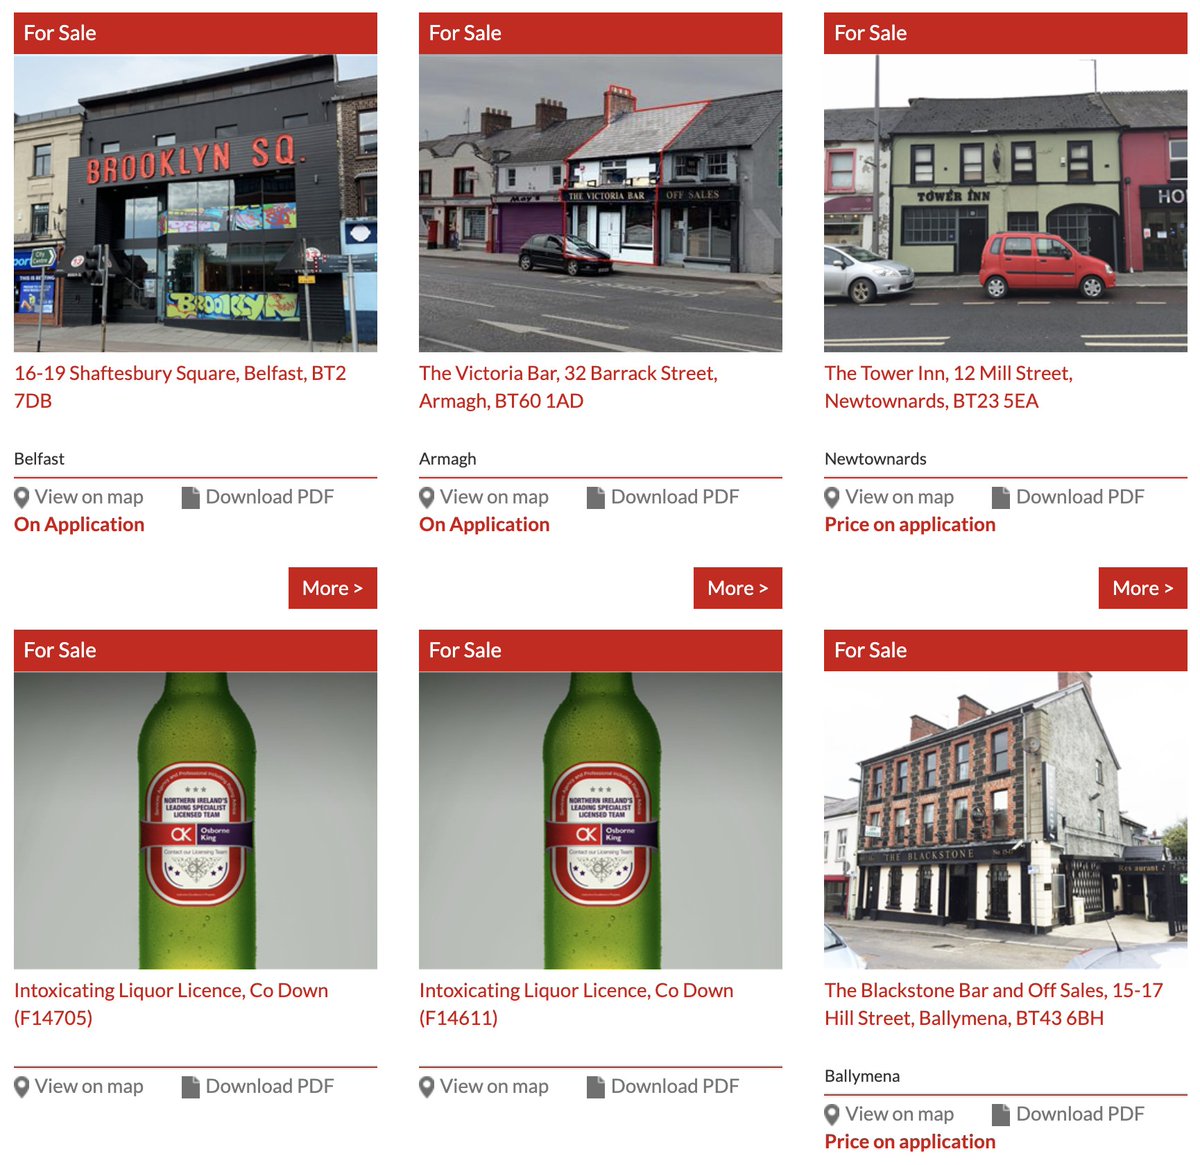 Currently, on Osborne King's website - one of the commercial property agencies in NI (I repeat: Just ONE of them) lists 25 Licences or licensed properties for sale or recently sold.As the impact of this virus continues to grow, this figure will undoubtedly increase.5/13